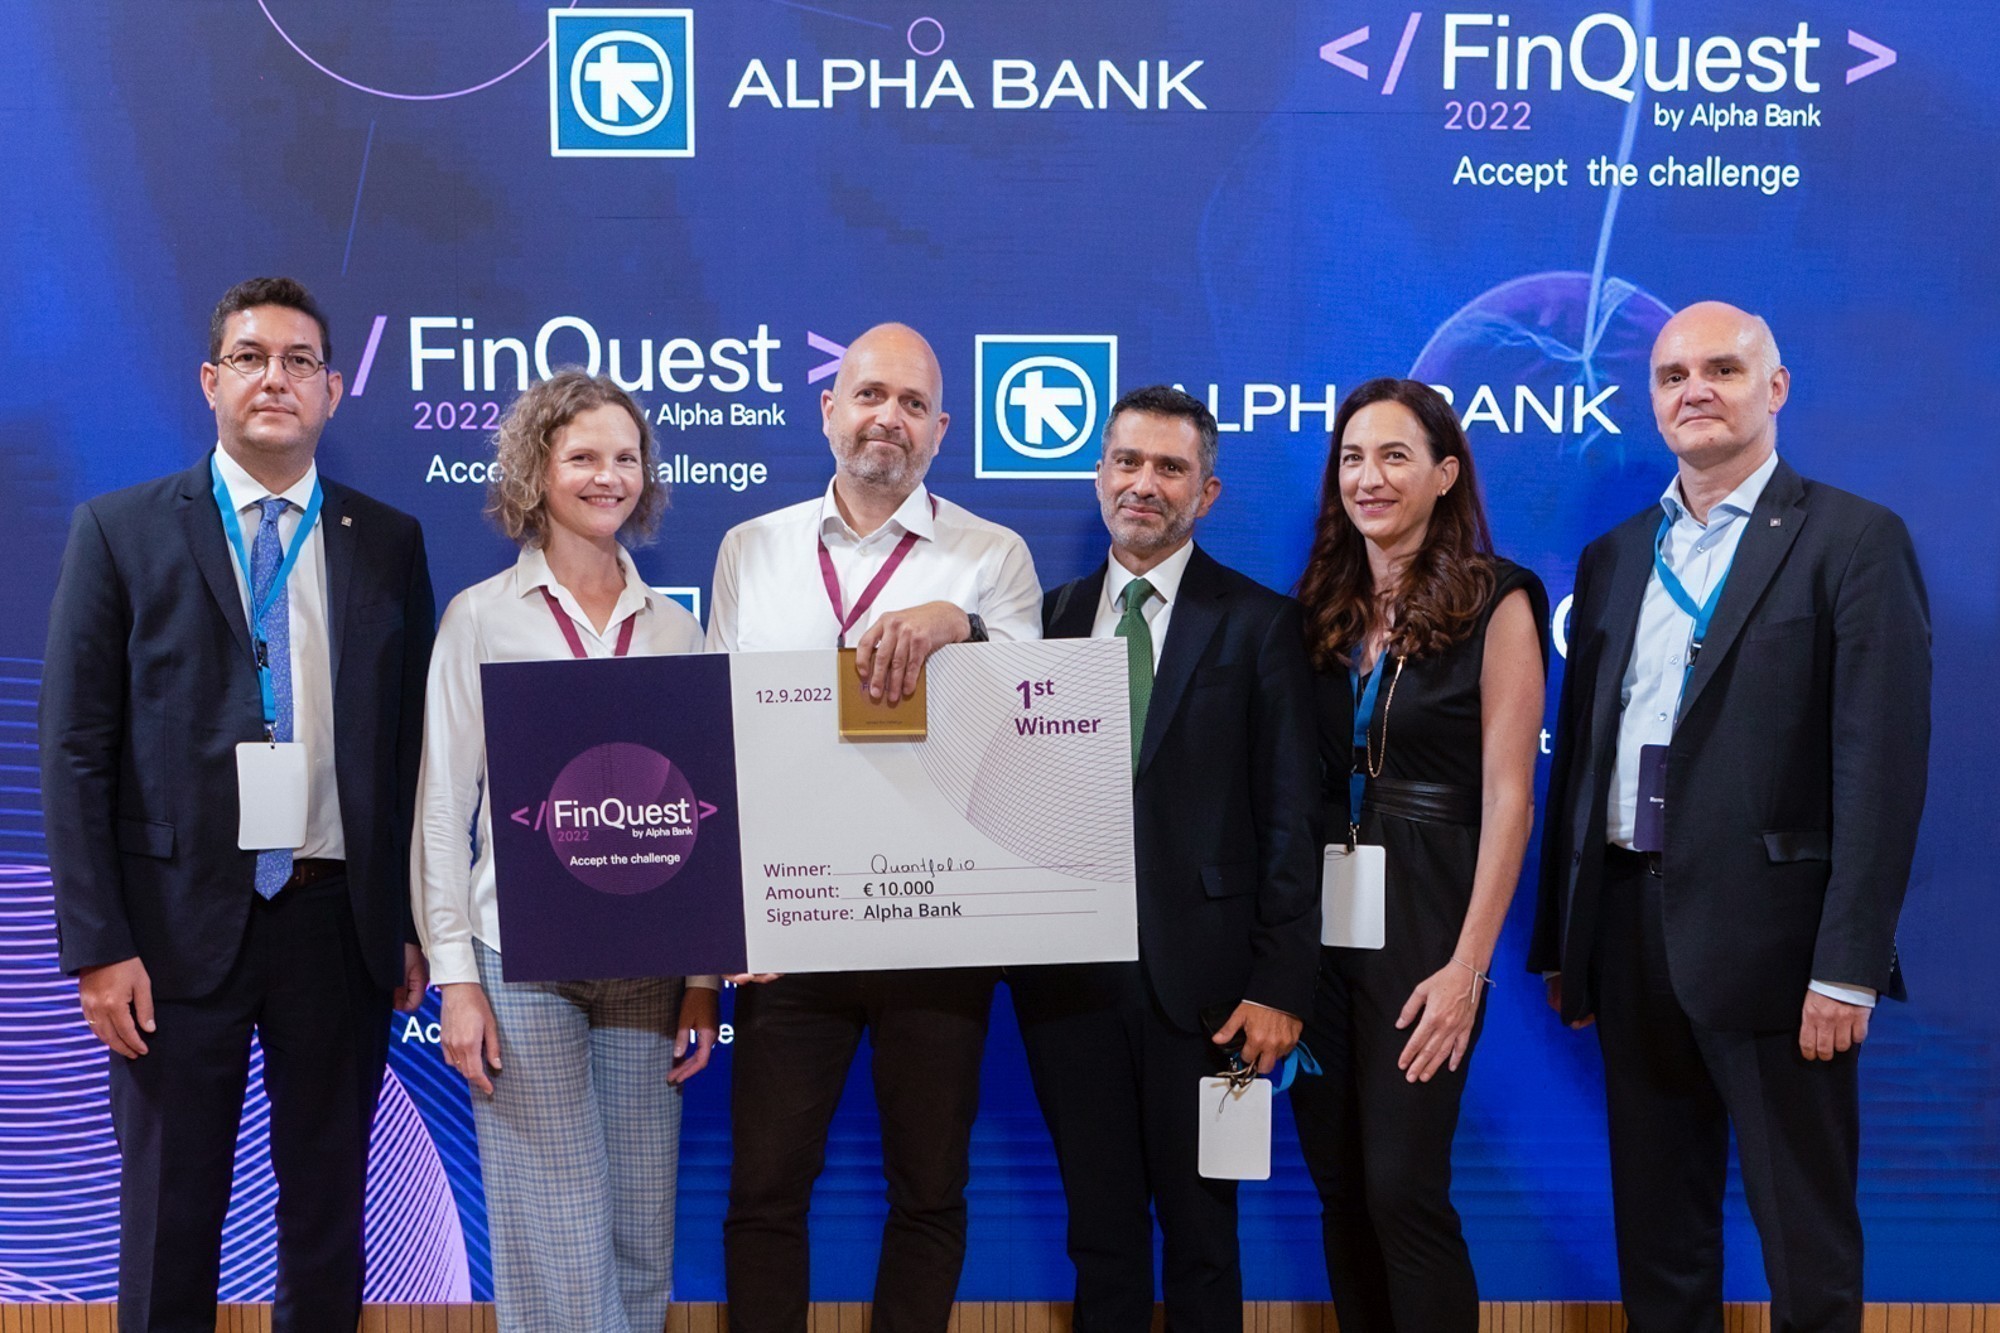 FinQuest by Alpha Bank 2022